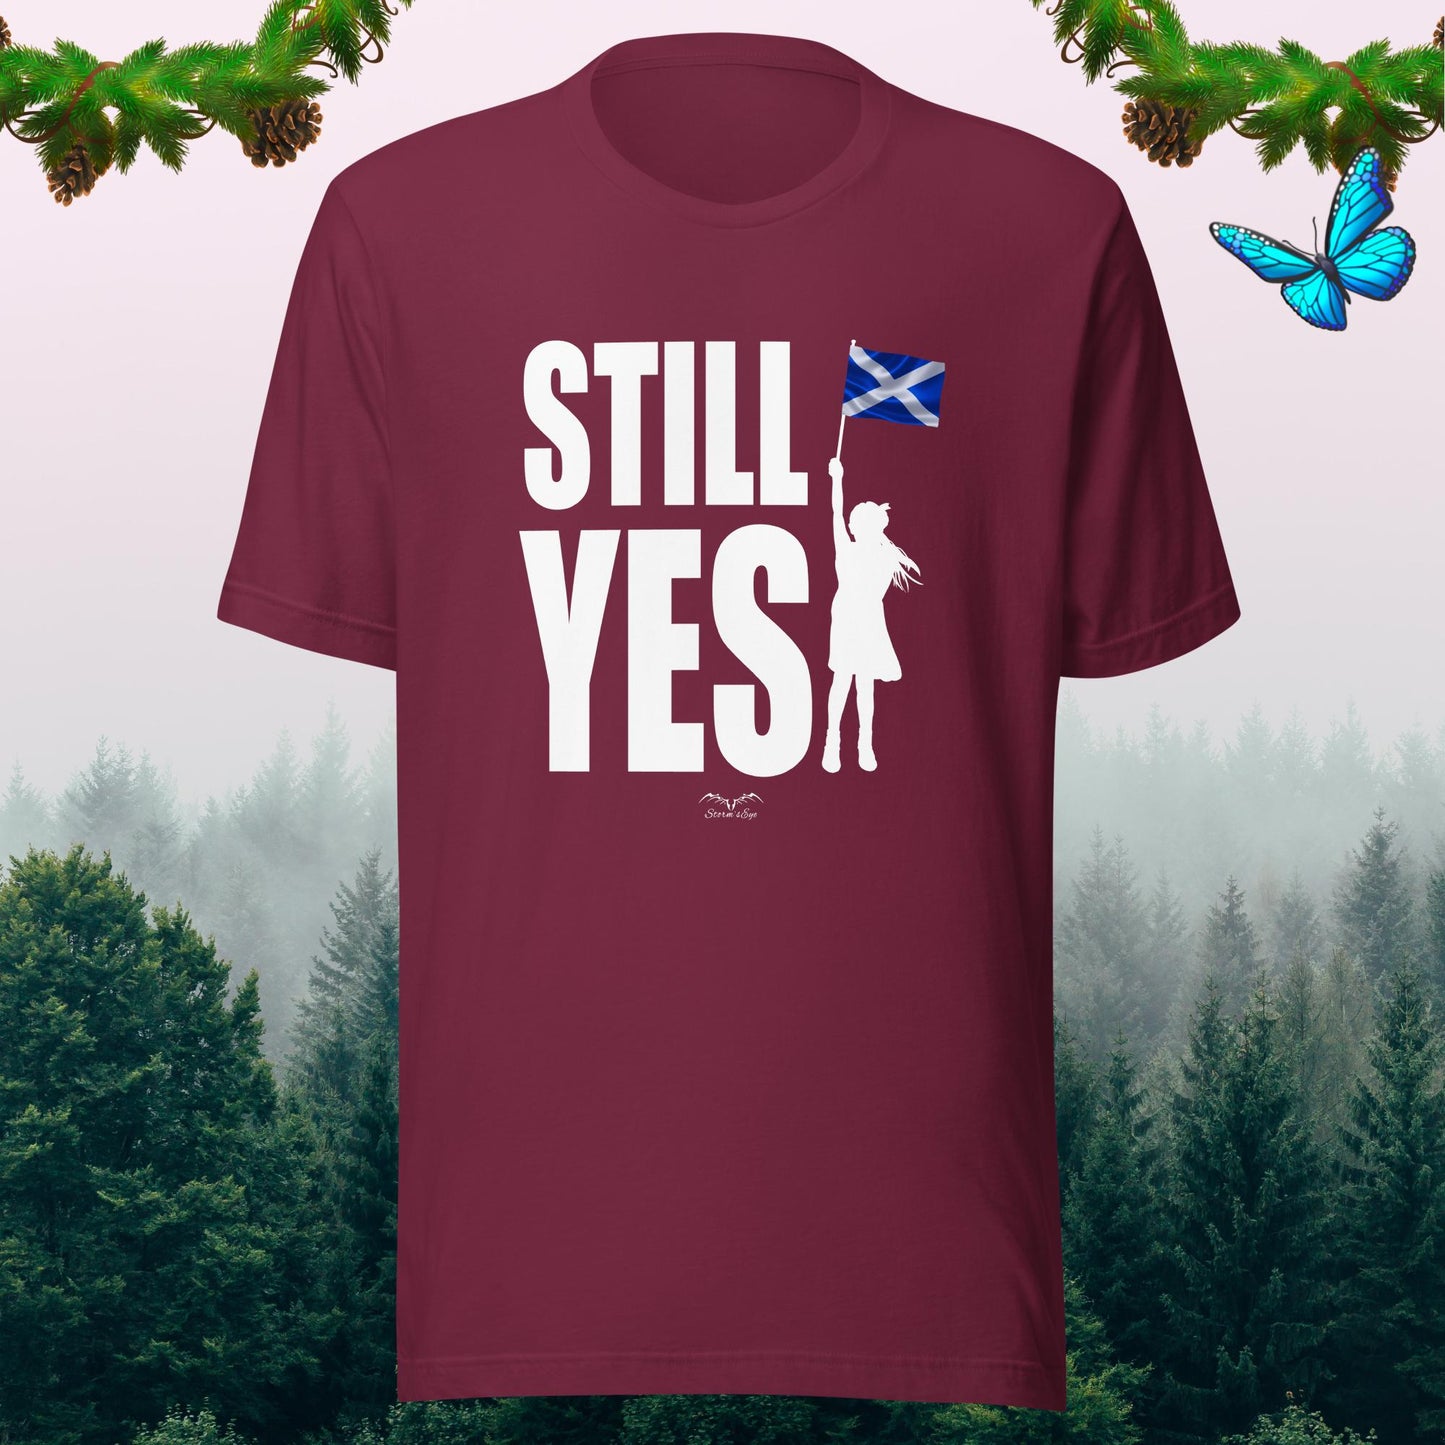 Still Yes Scottish Independence T-shirt wine red by stormseye design